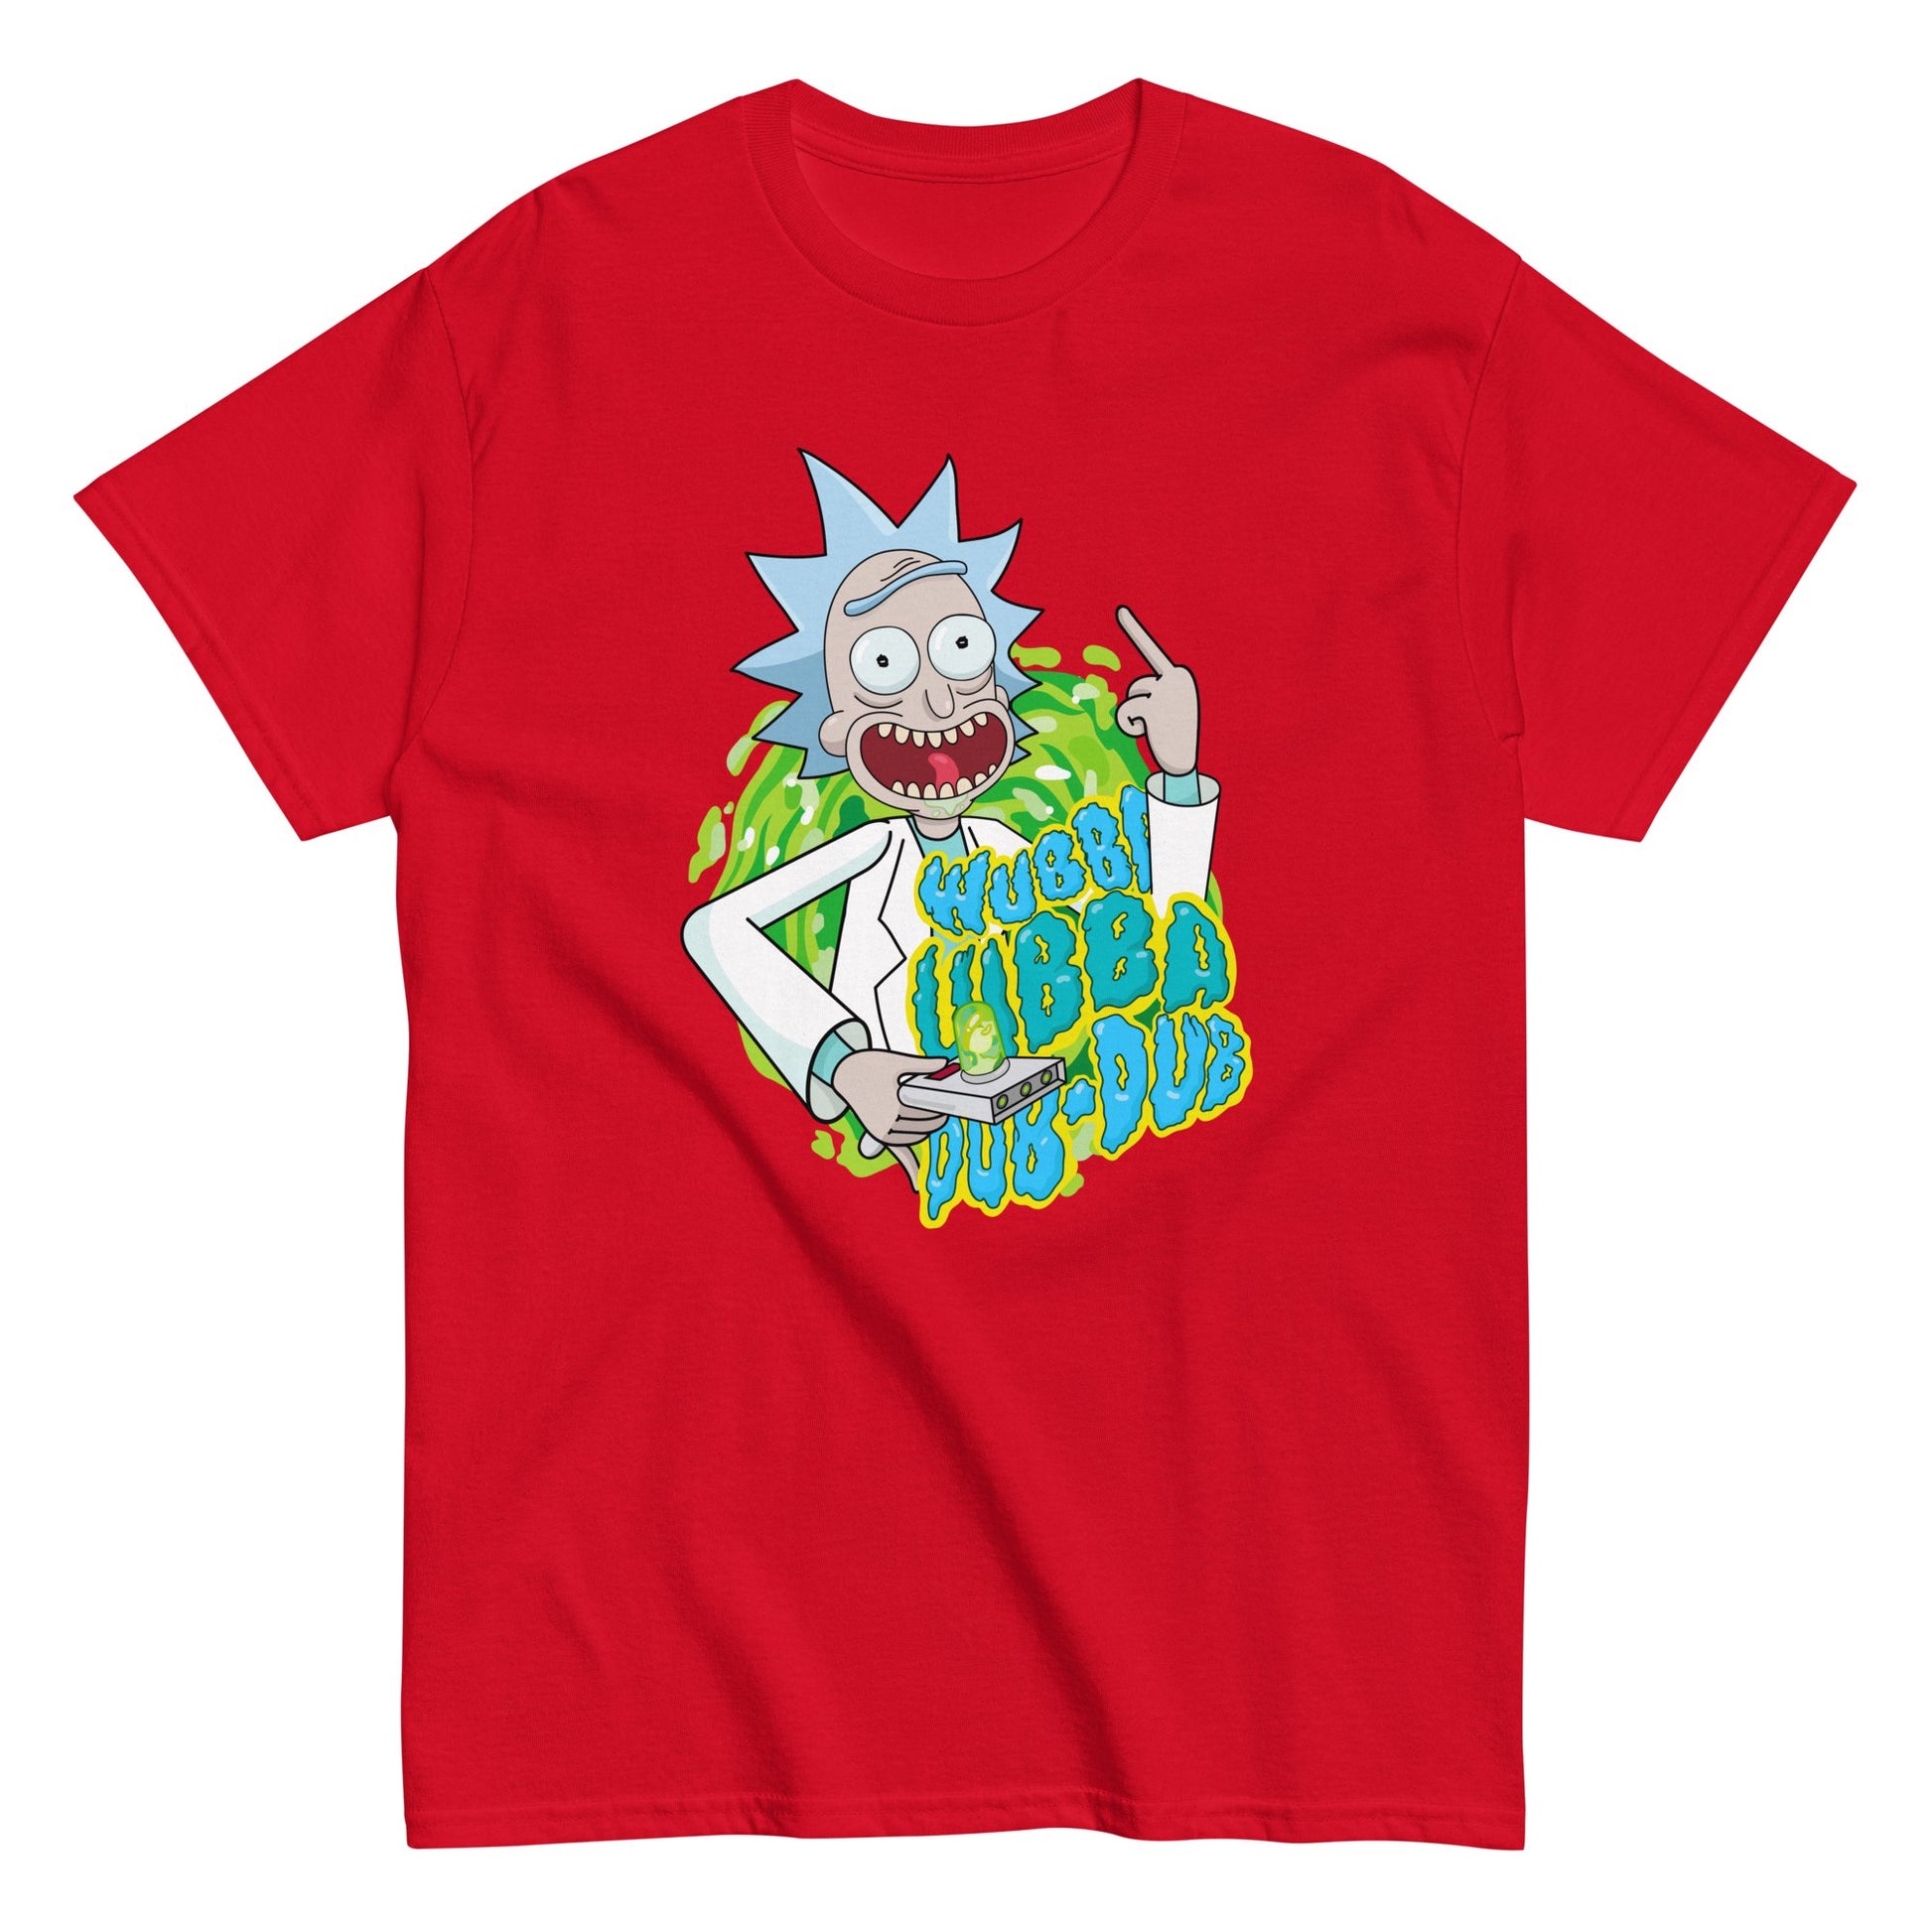 Get Schwifty in Style with Our Exclusive Rick and Morty Graphic Tees - The Truth Graphics